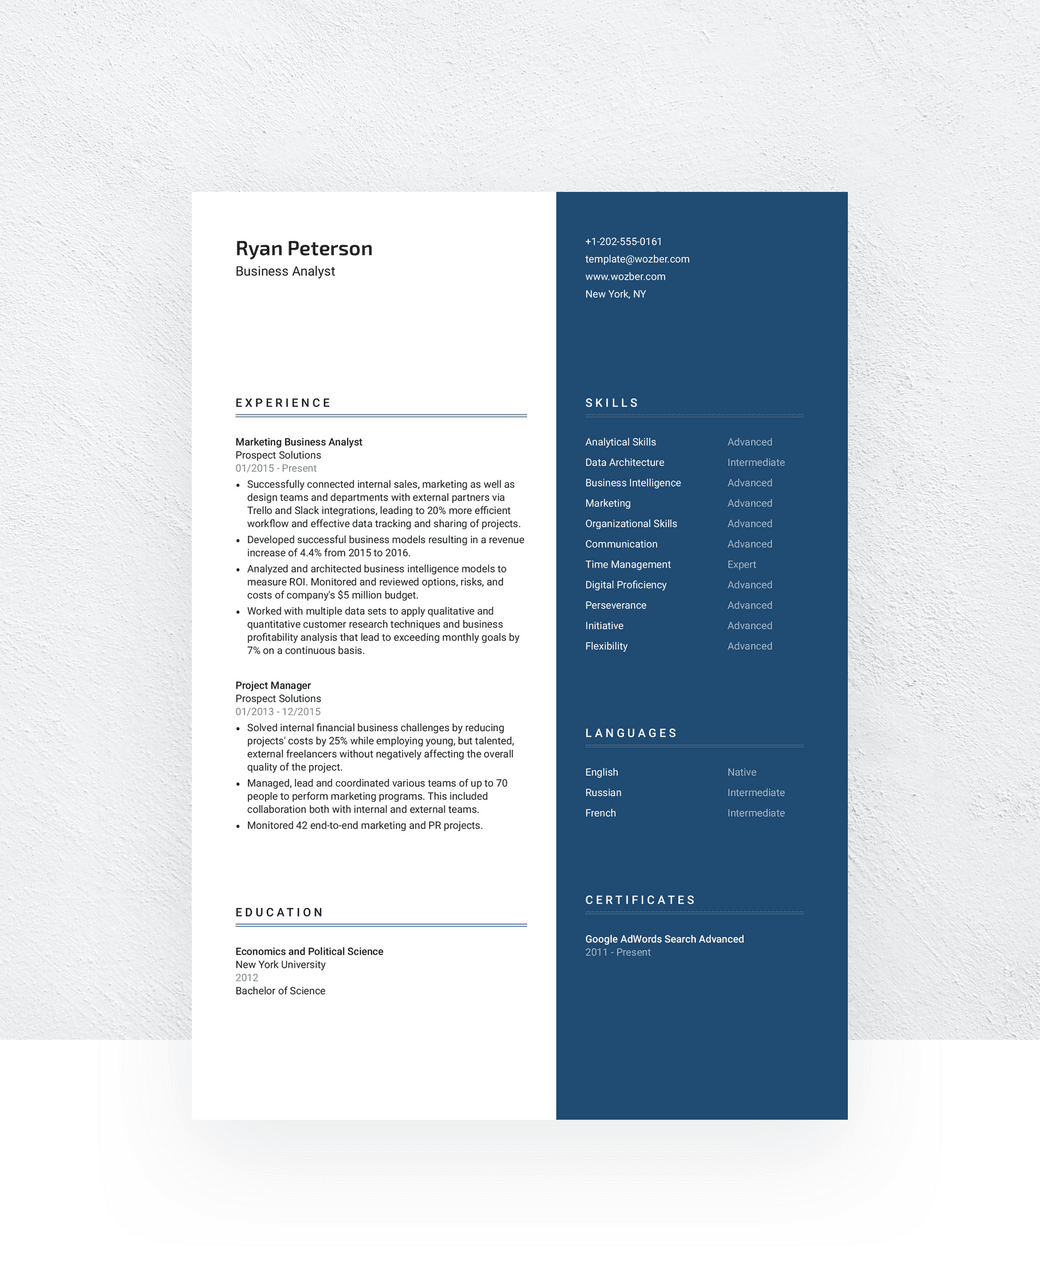 An old-fashioned yet still modern resume template to choose.